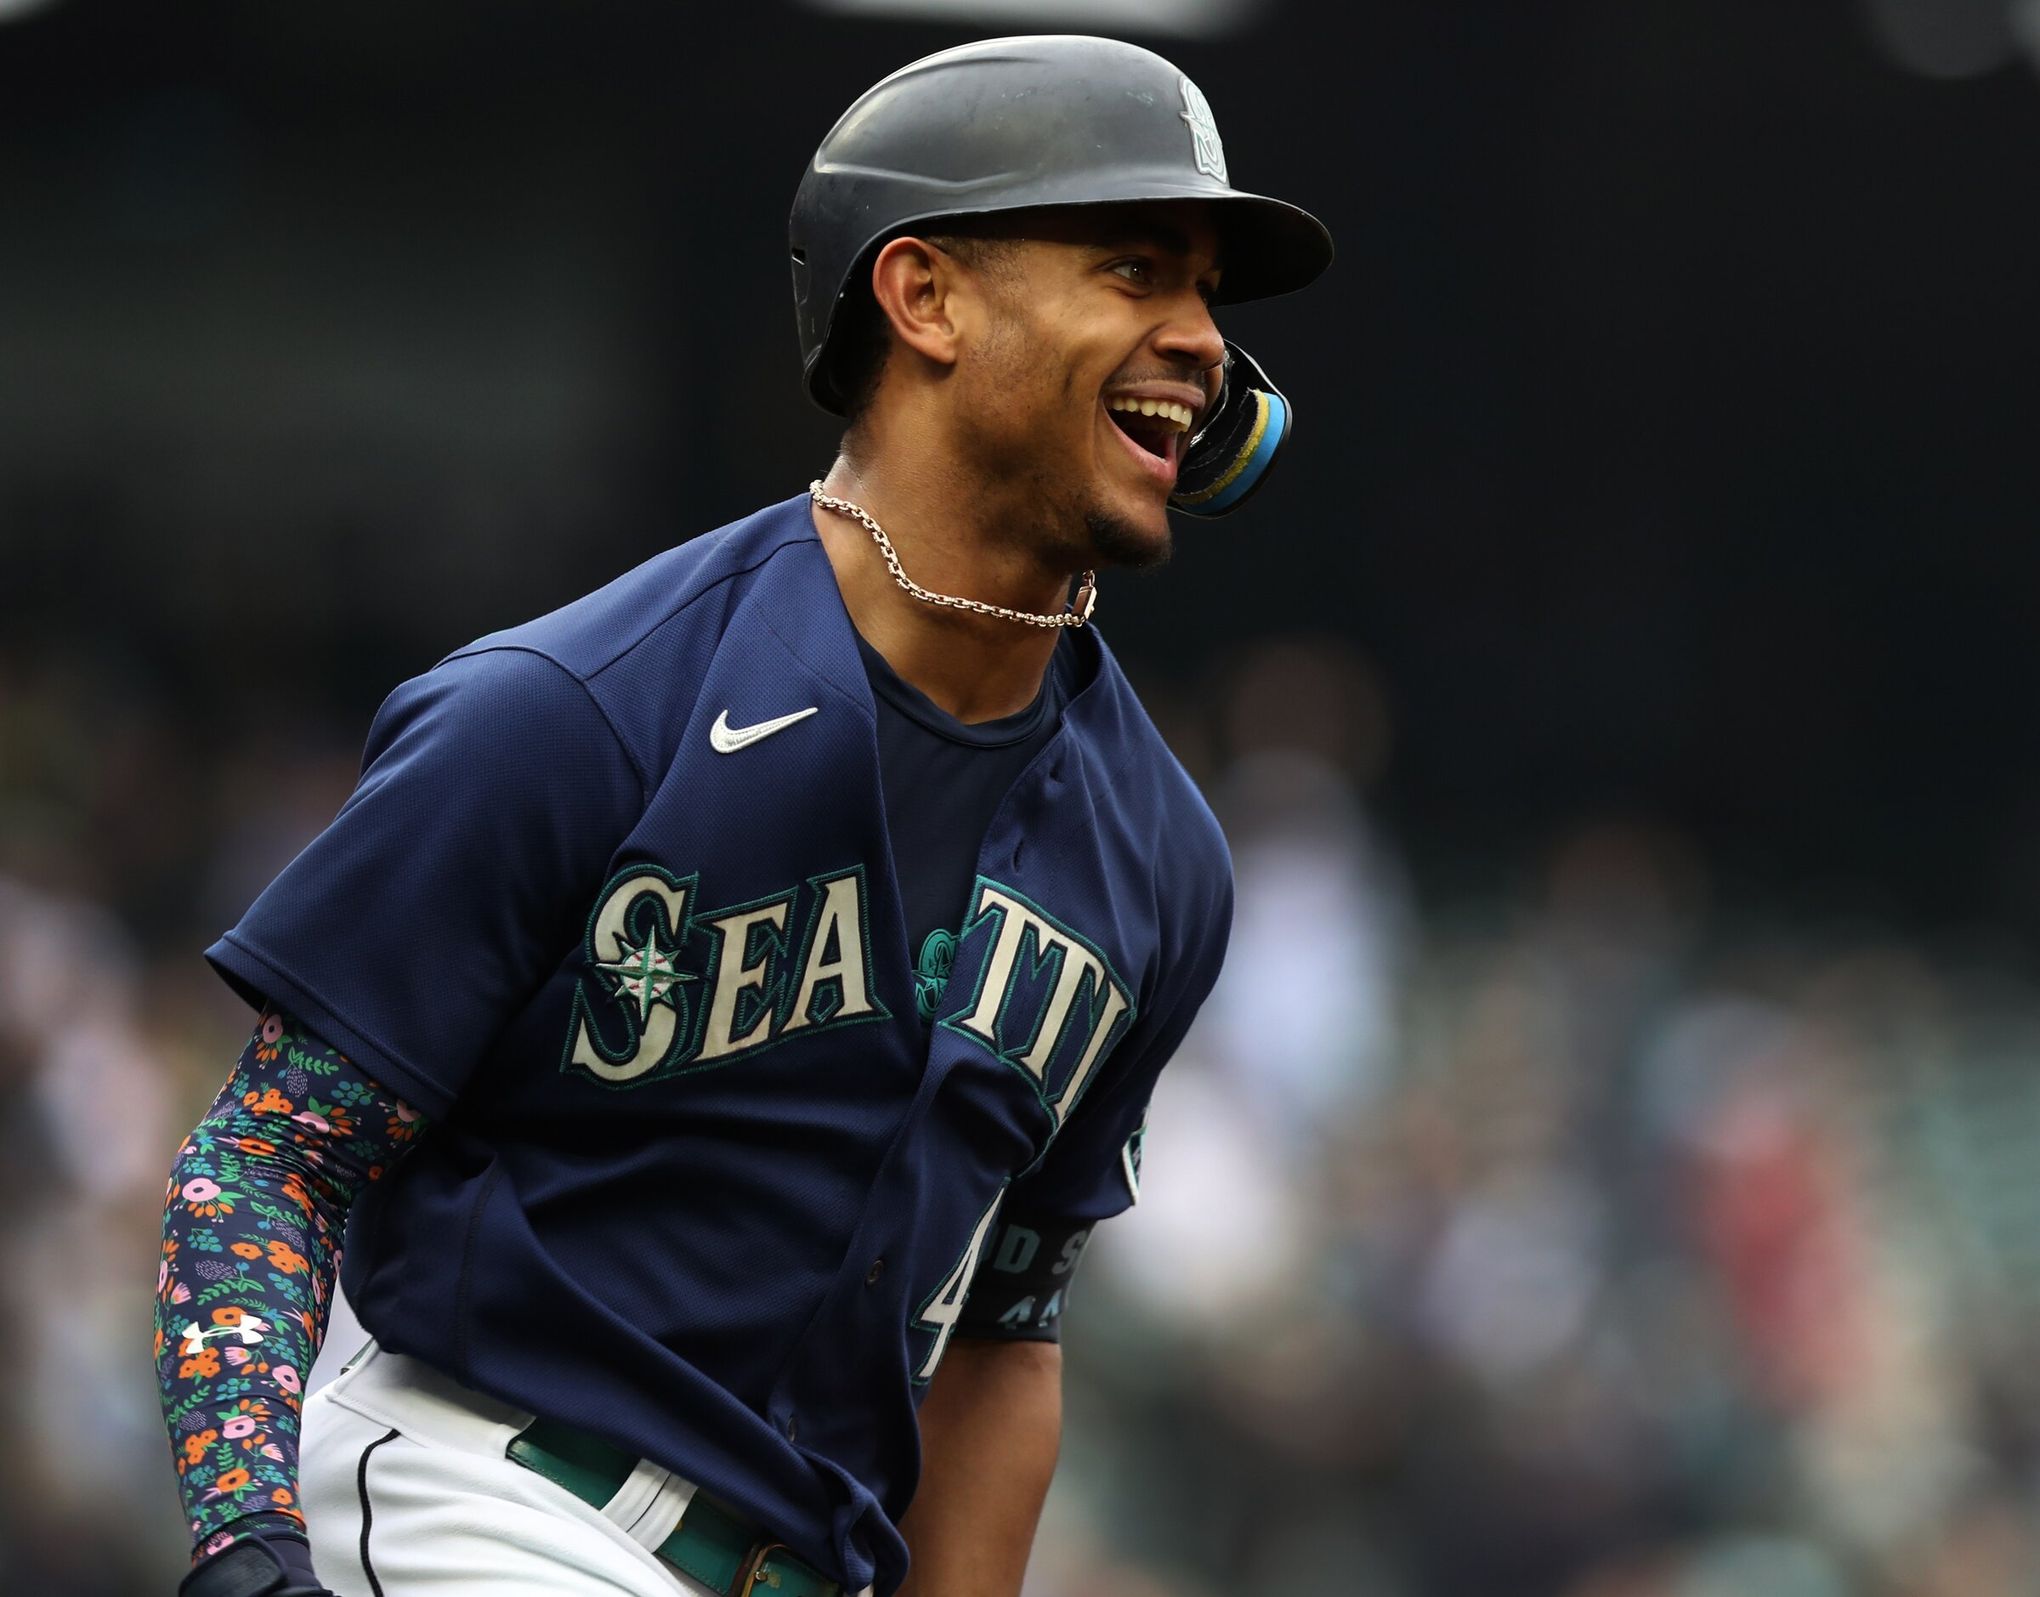 Mariners have 10 players competing in World Baseball Classic